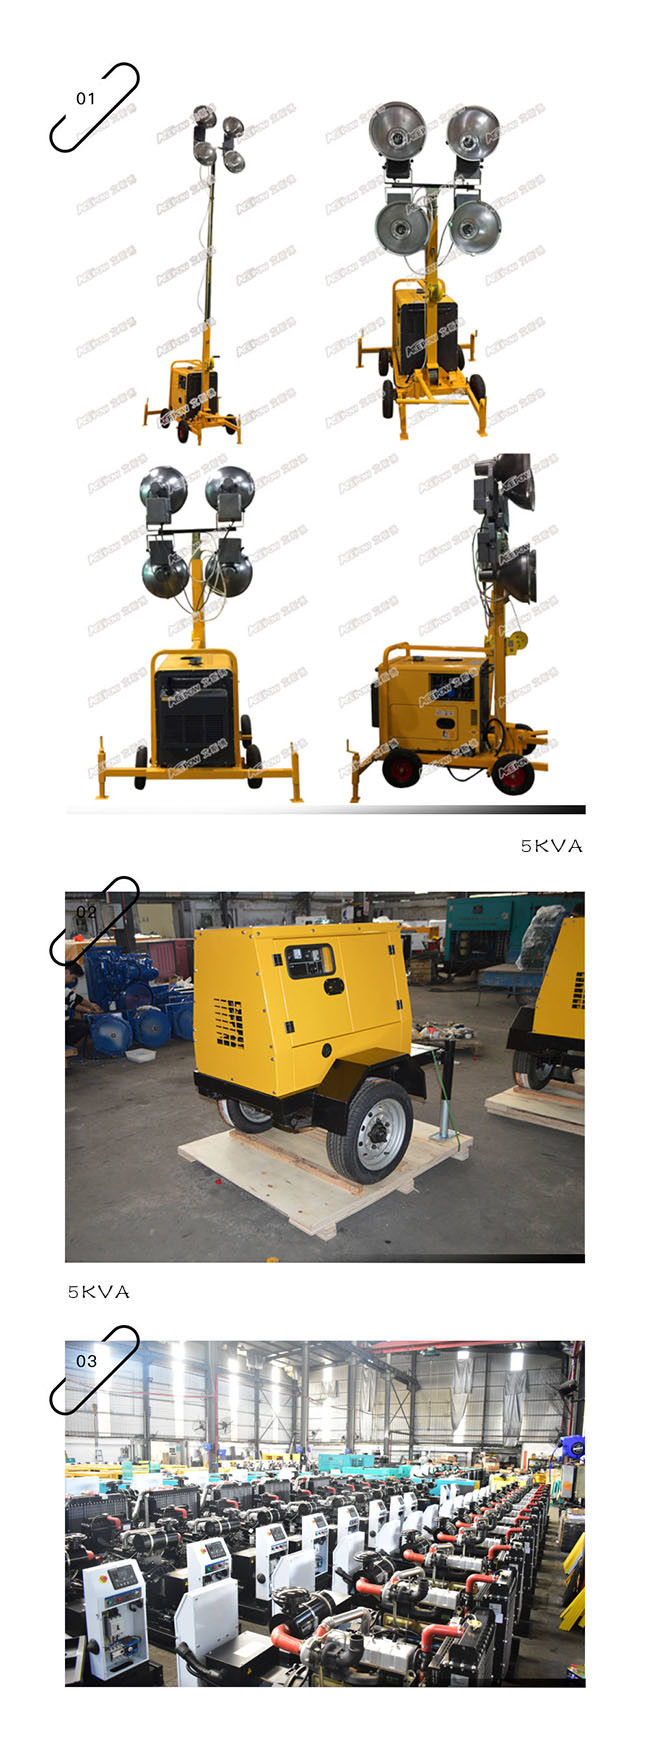 latest company news about Air Cooled 76m 60HZ Portable Generator Light Tower , Diesel Generator Light Tower  0